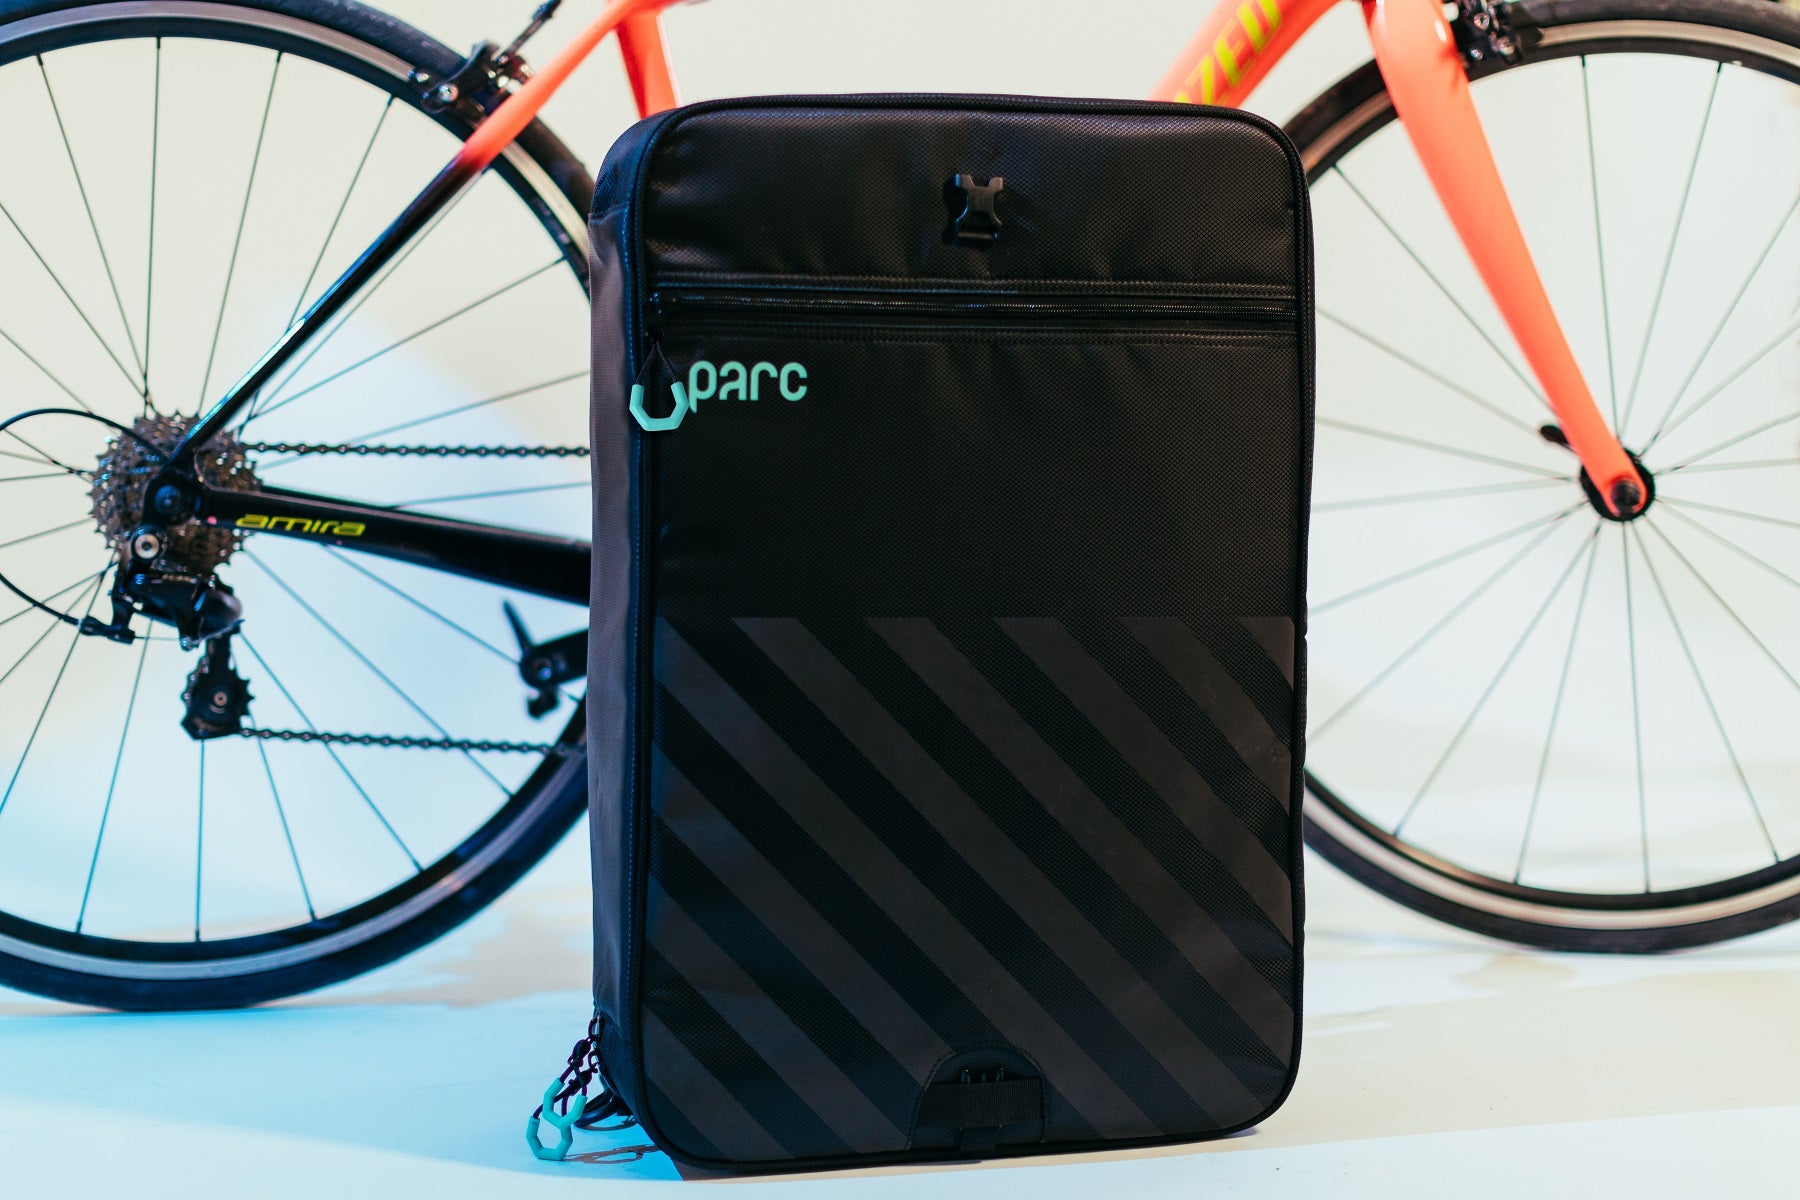 Black Parc cycling kit bag with turquoise logo and zipper pulls is zipped up and standing upright in front of road bike.